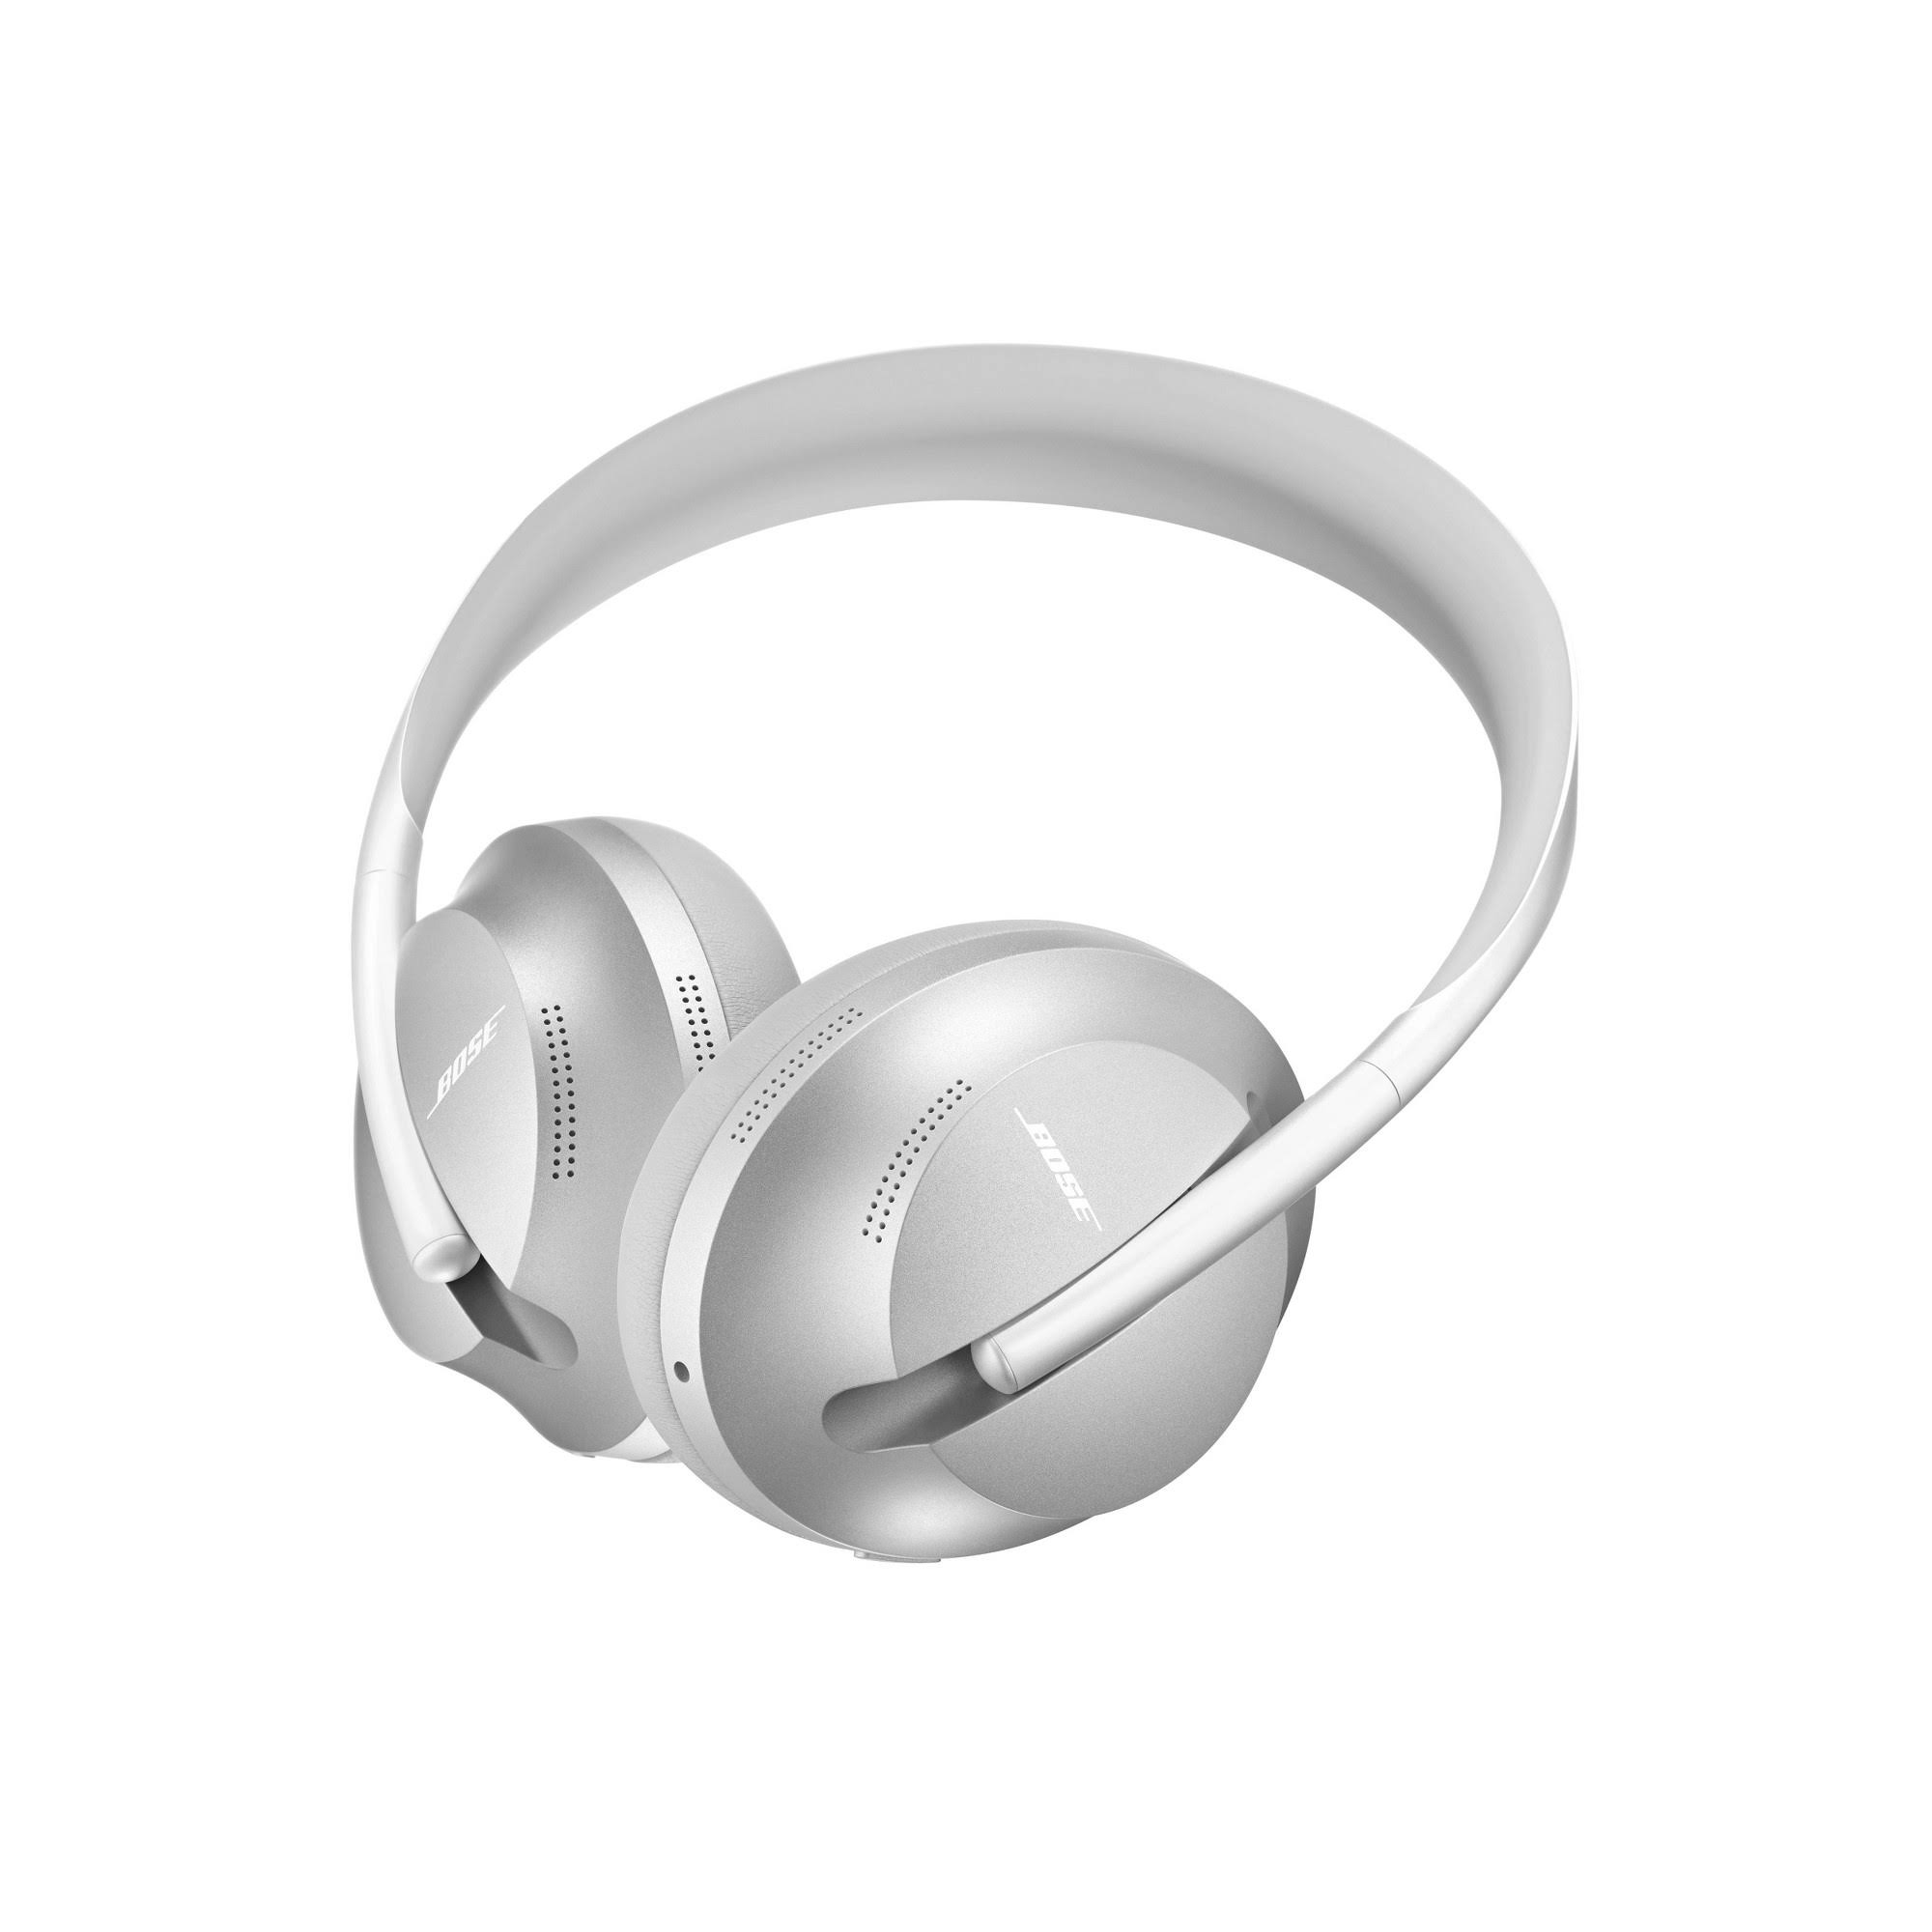 Bose 700 Bluetooth Wireless On-Ear Headphones with Mic Noise-Canceling Luxe Silver